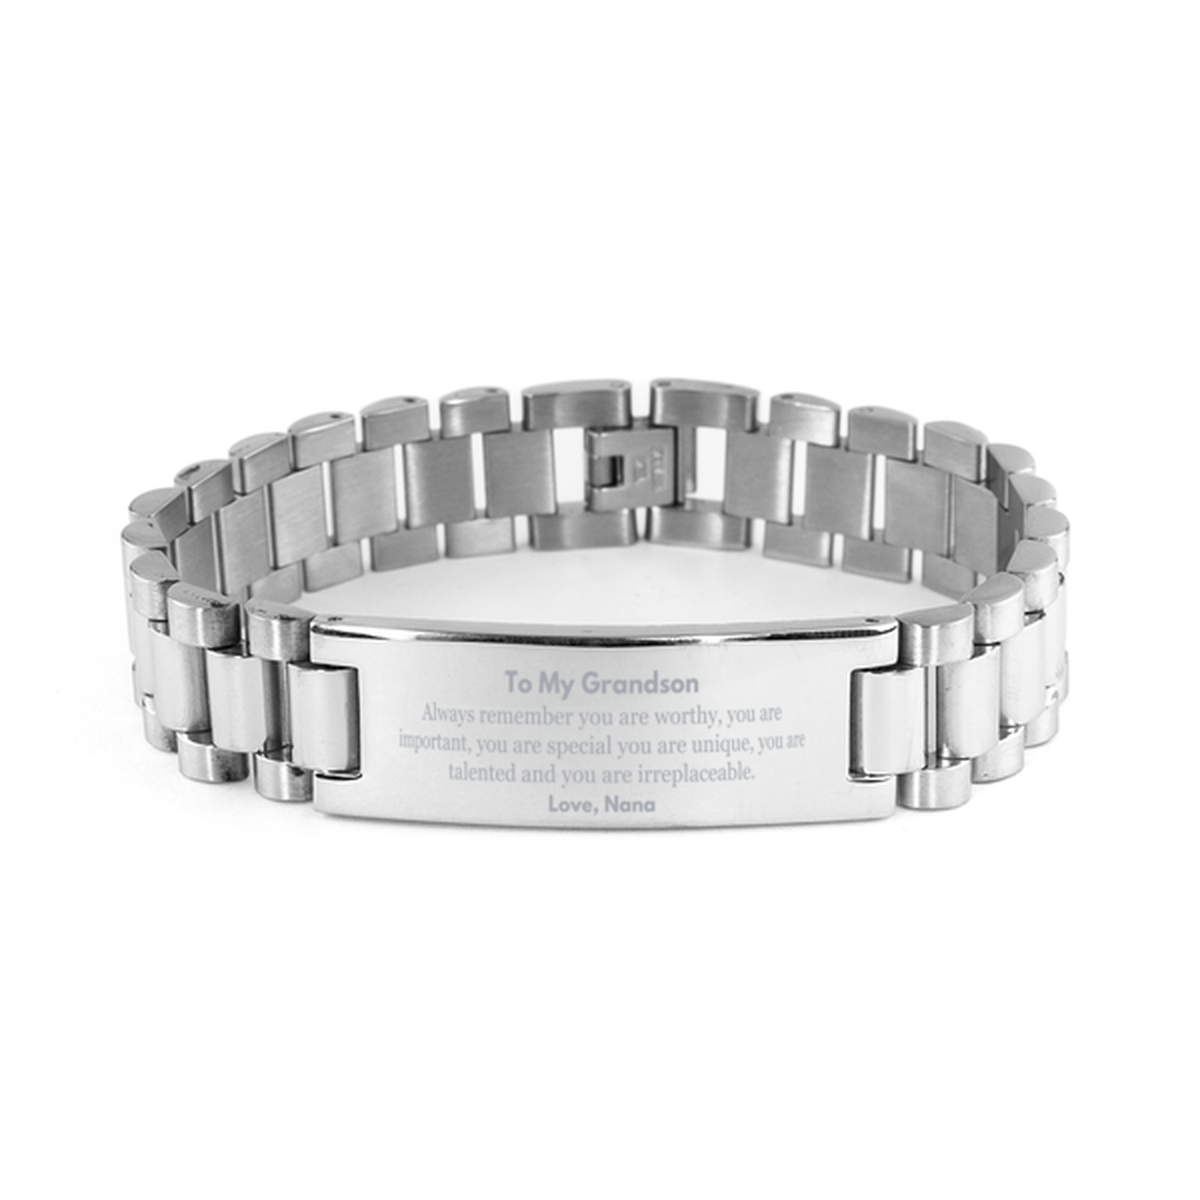 Grandson Birthday Gifts from Nana, Inspirational Ladder Stainless Steel Bracelet for Grandson Christmas Graduation Gifts for Grandson Always remember you are worthy, you are important. Love, Nana